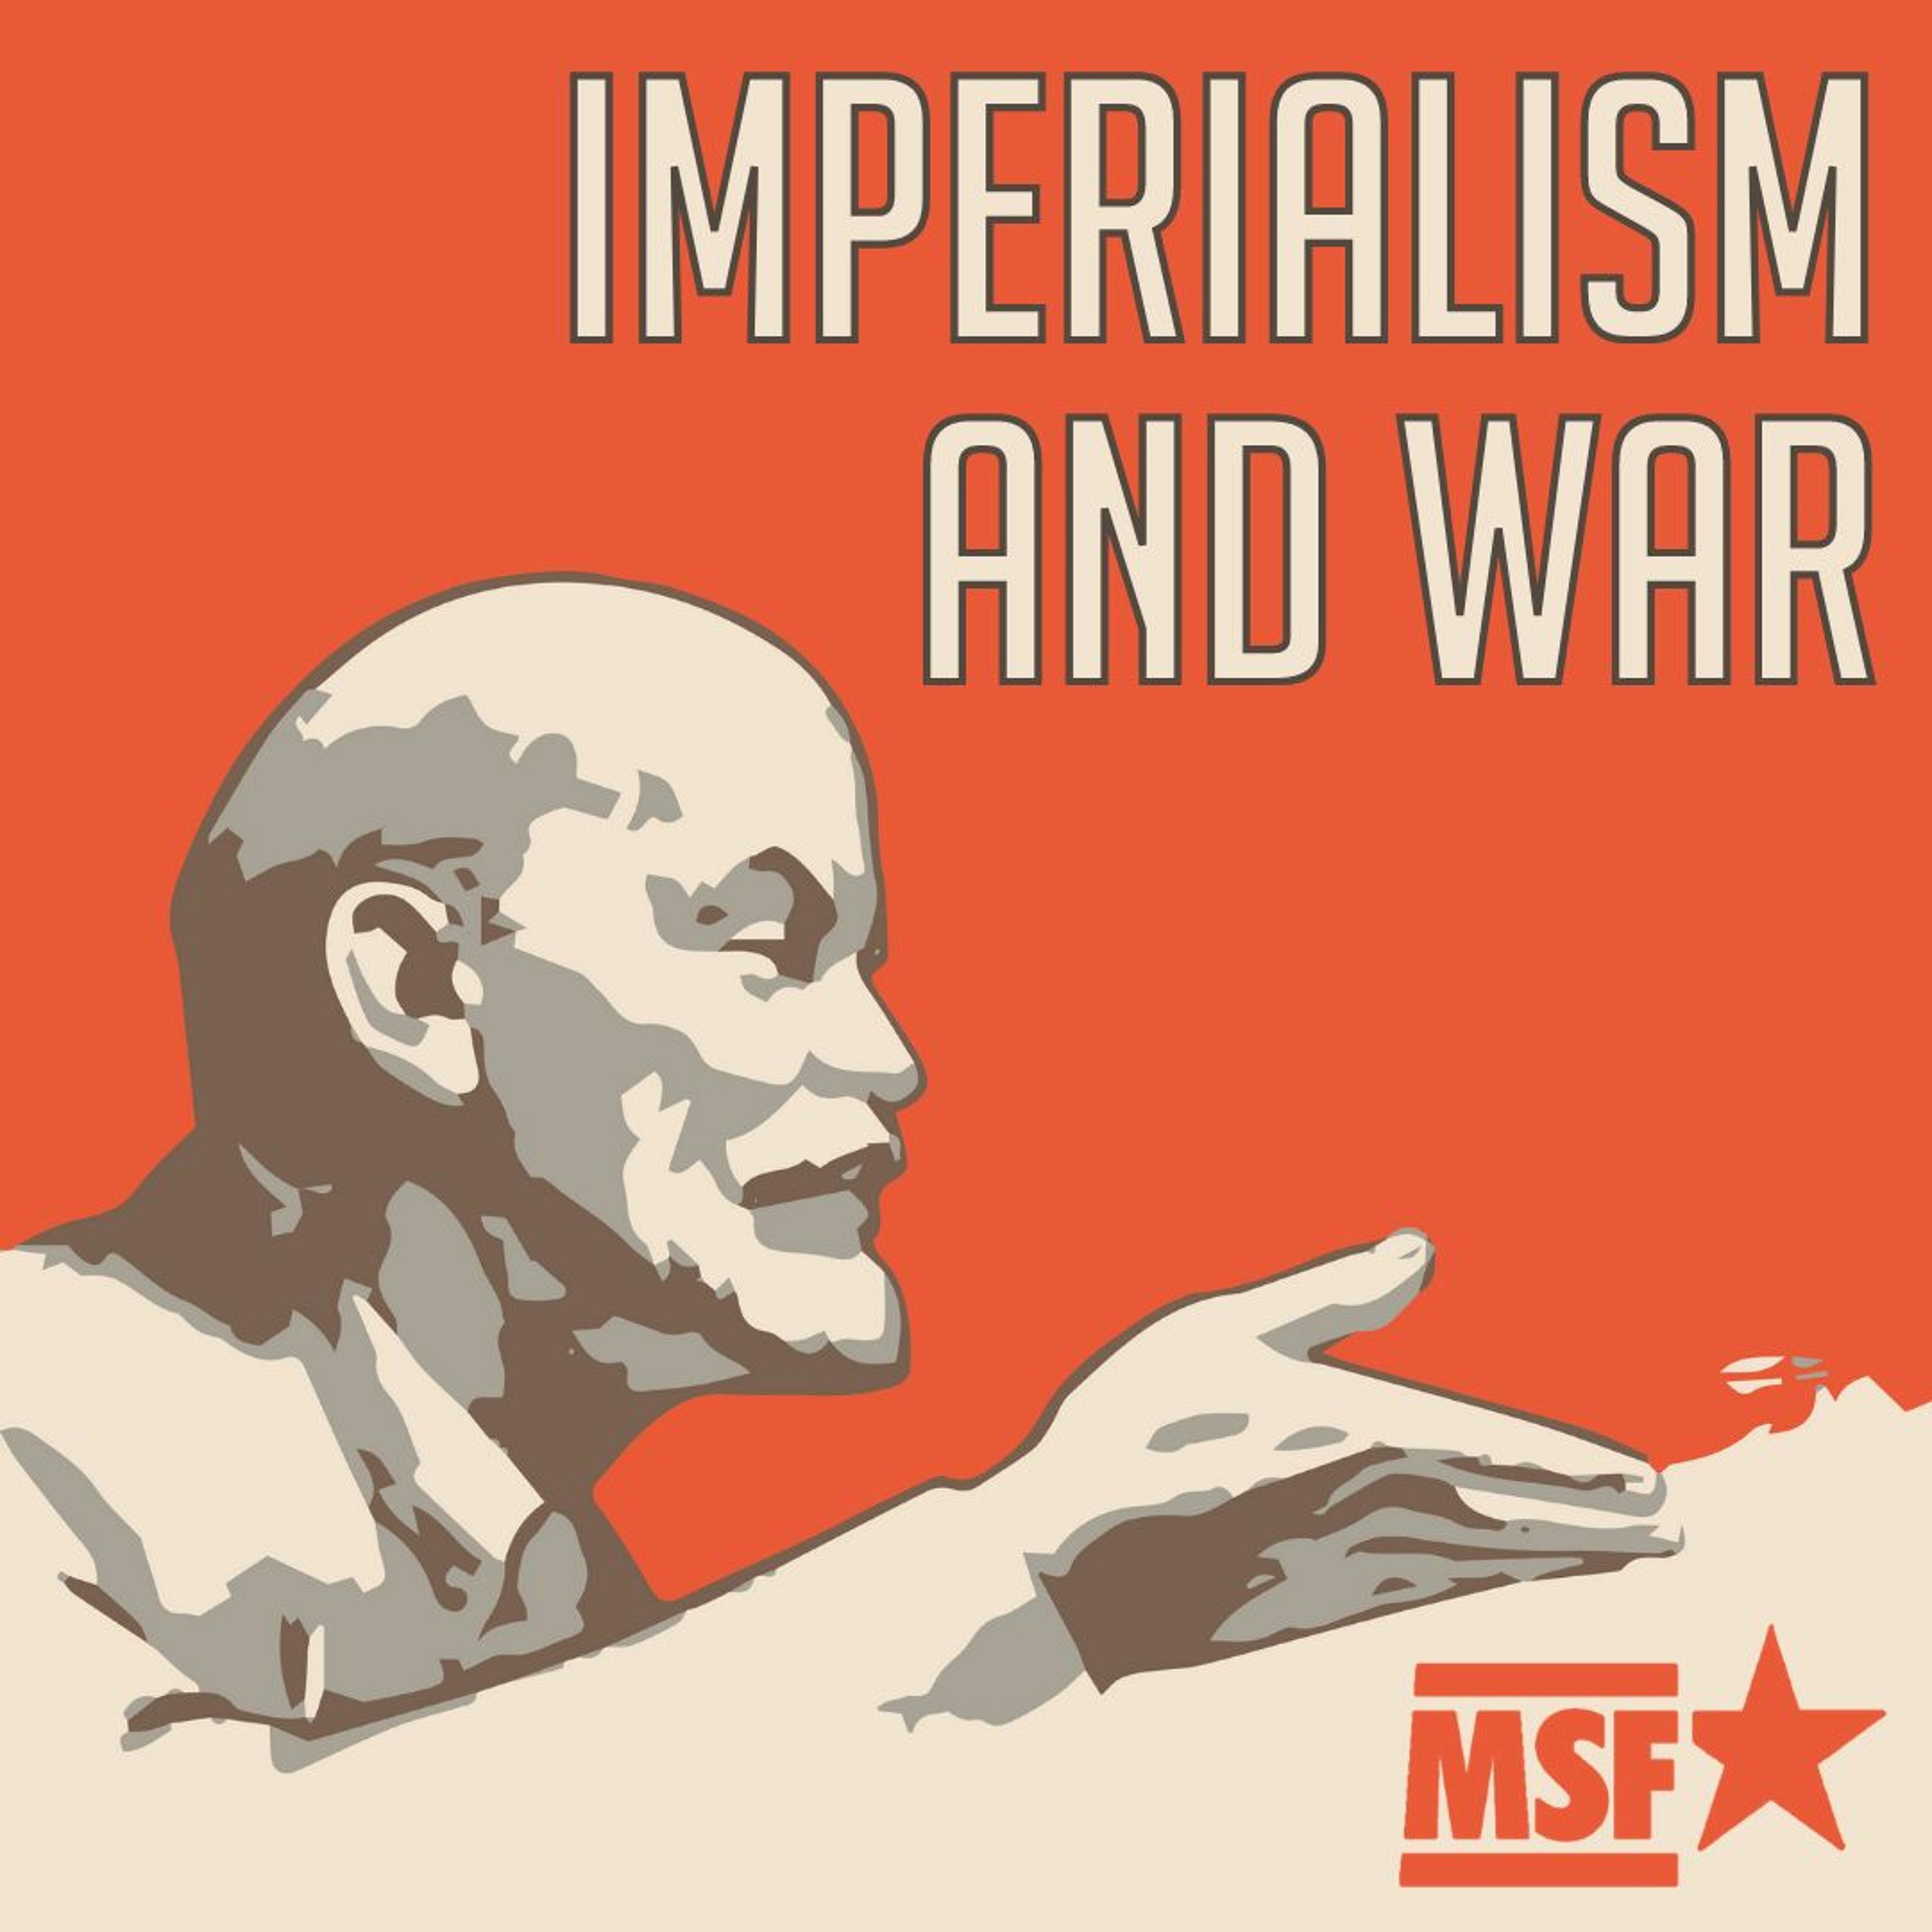 Imperialism and war | What did Lenin really stand for?